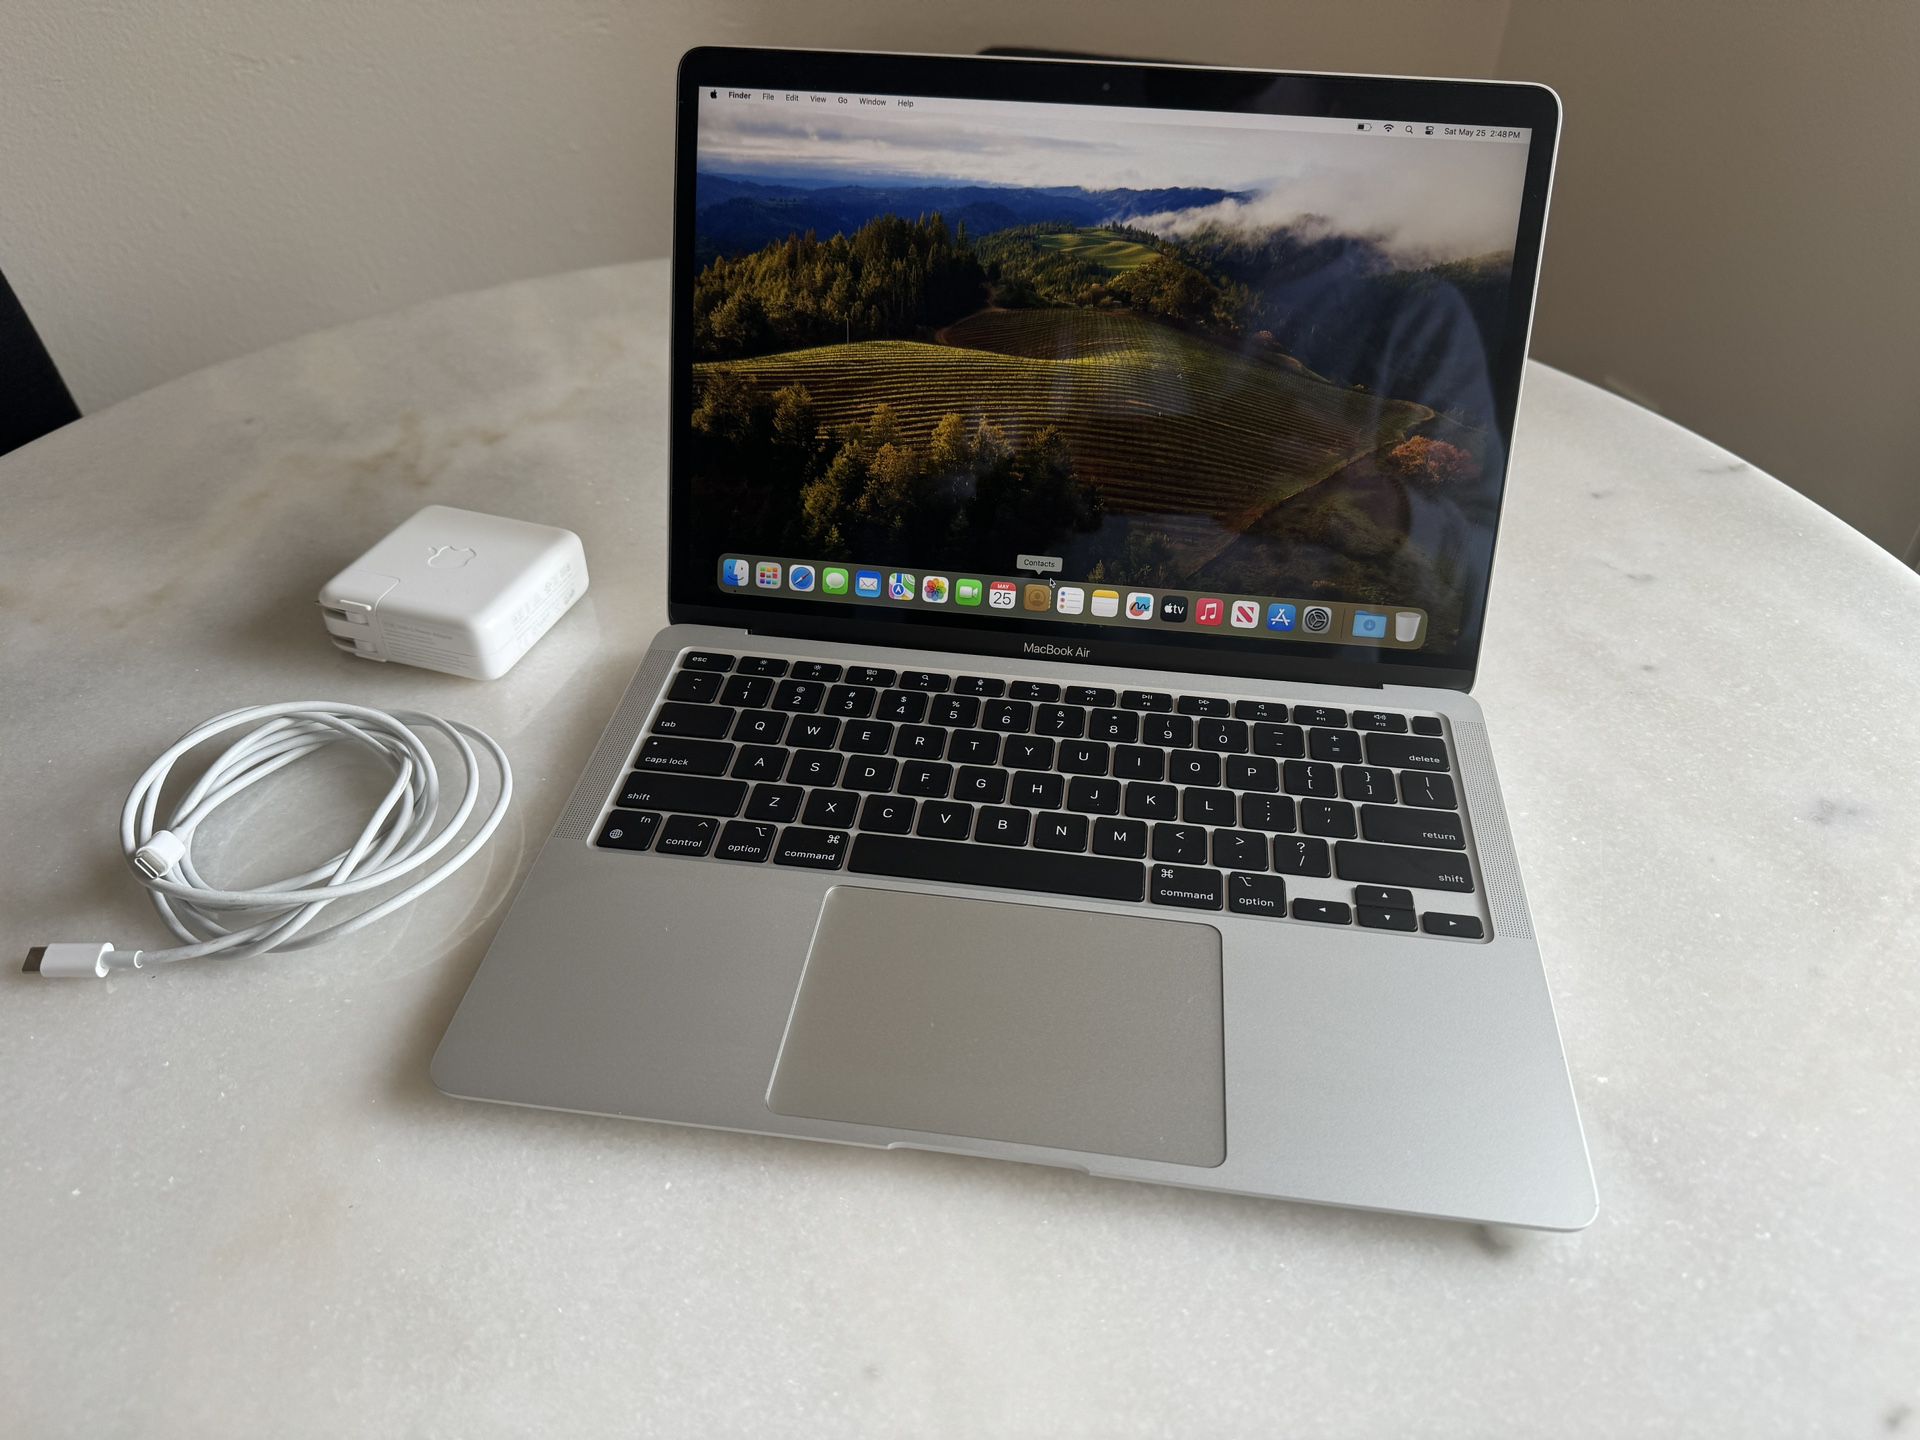 Apple MacBook Air M1 with Apple Care+